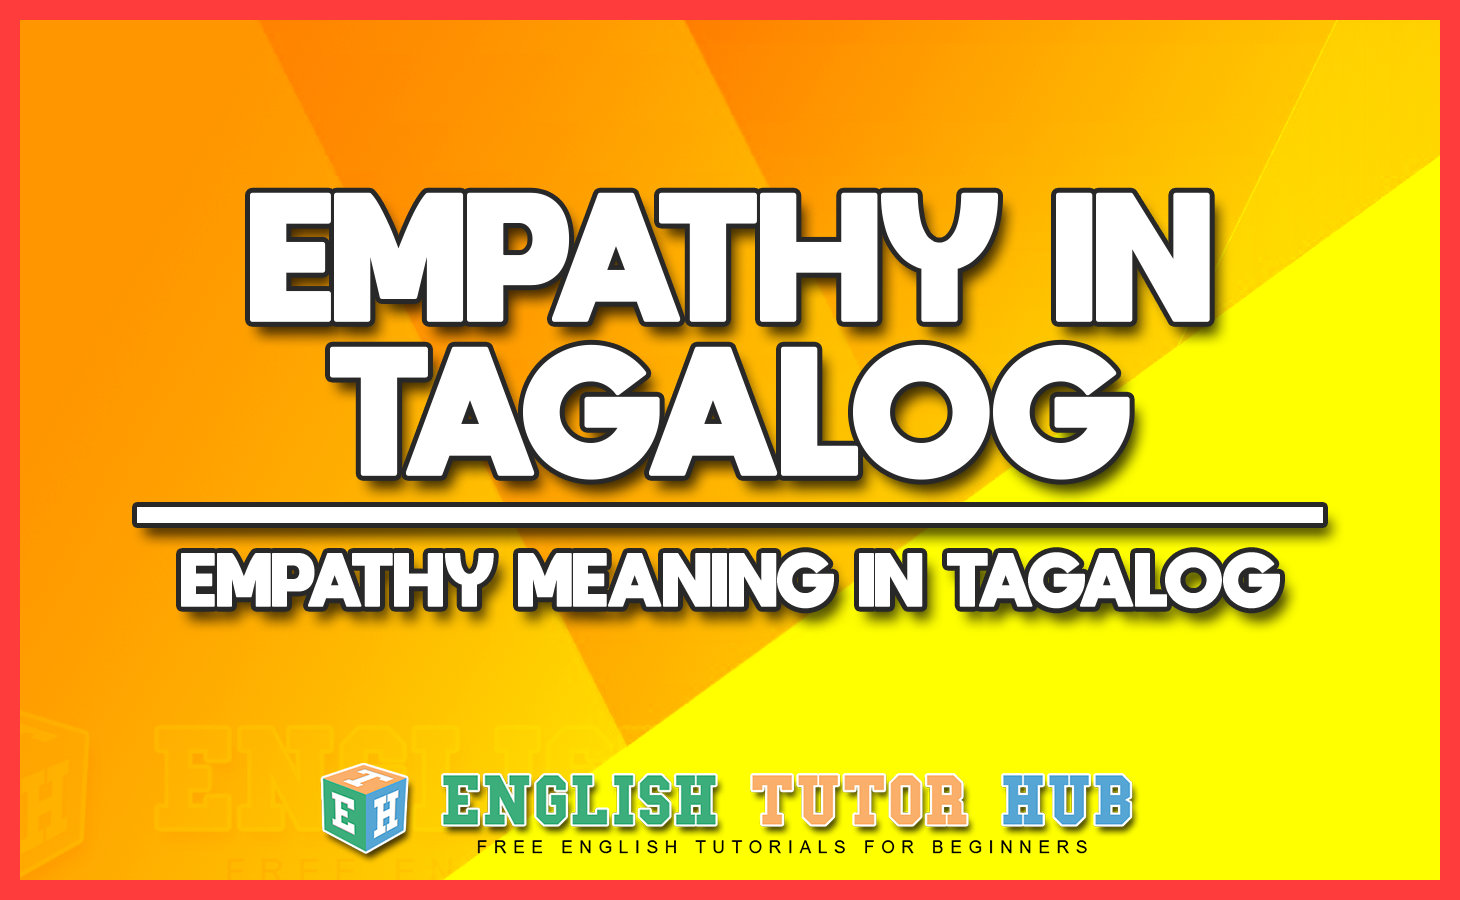 EMPATHY IN TAGALOG - EMPATHY MEANING IN TAGALOG